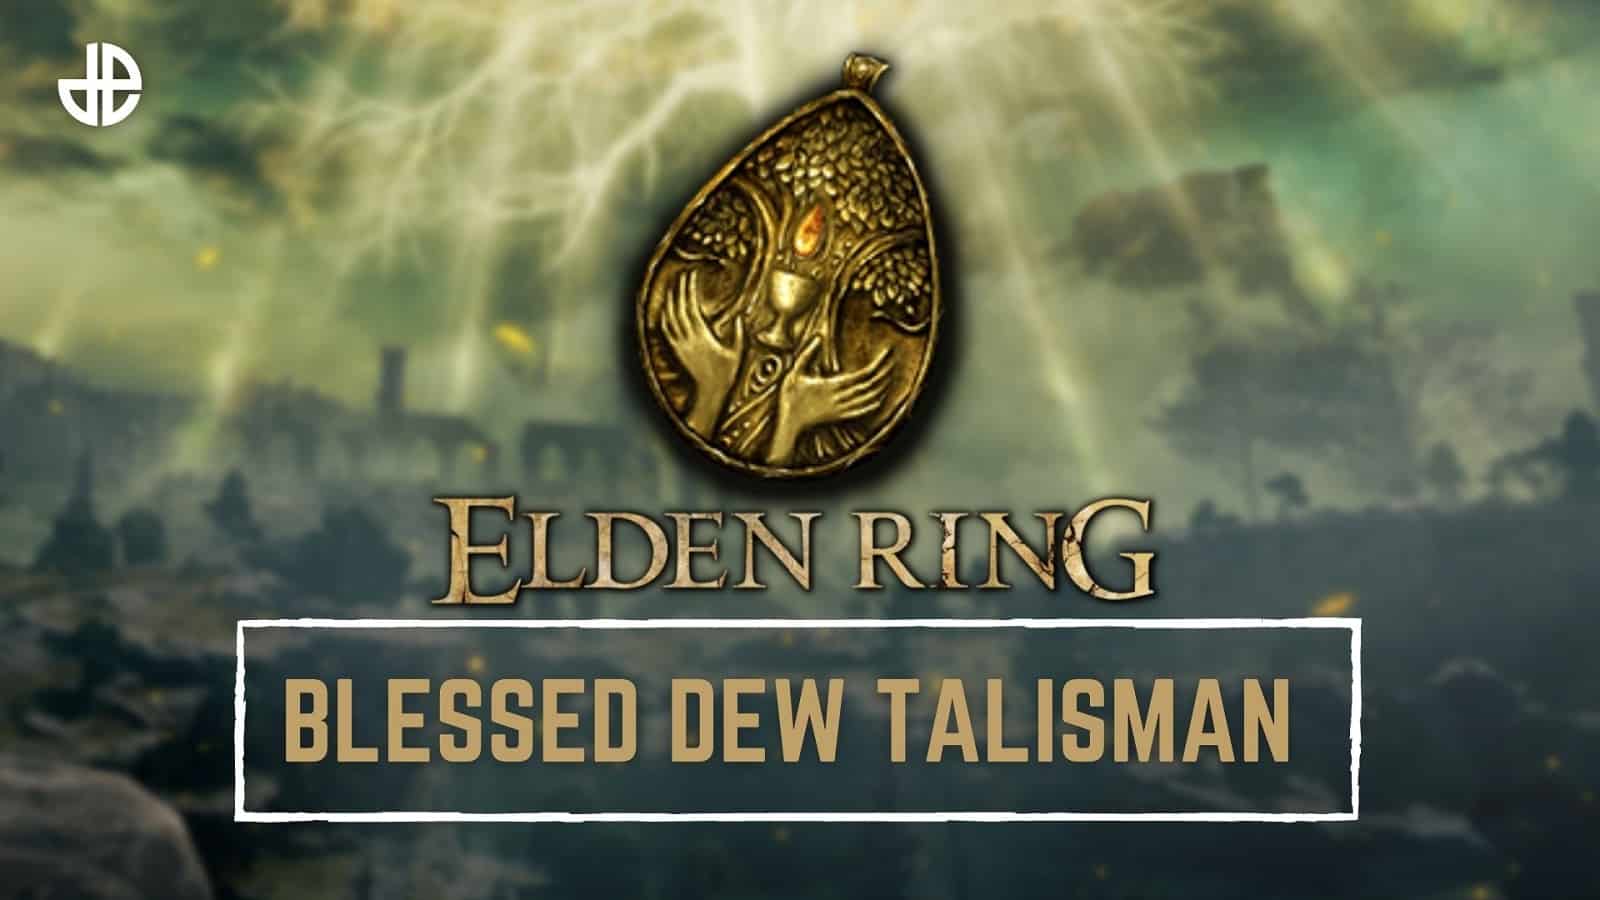 An image of the Blessed Dew Talisman in Elden Ring